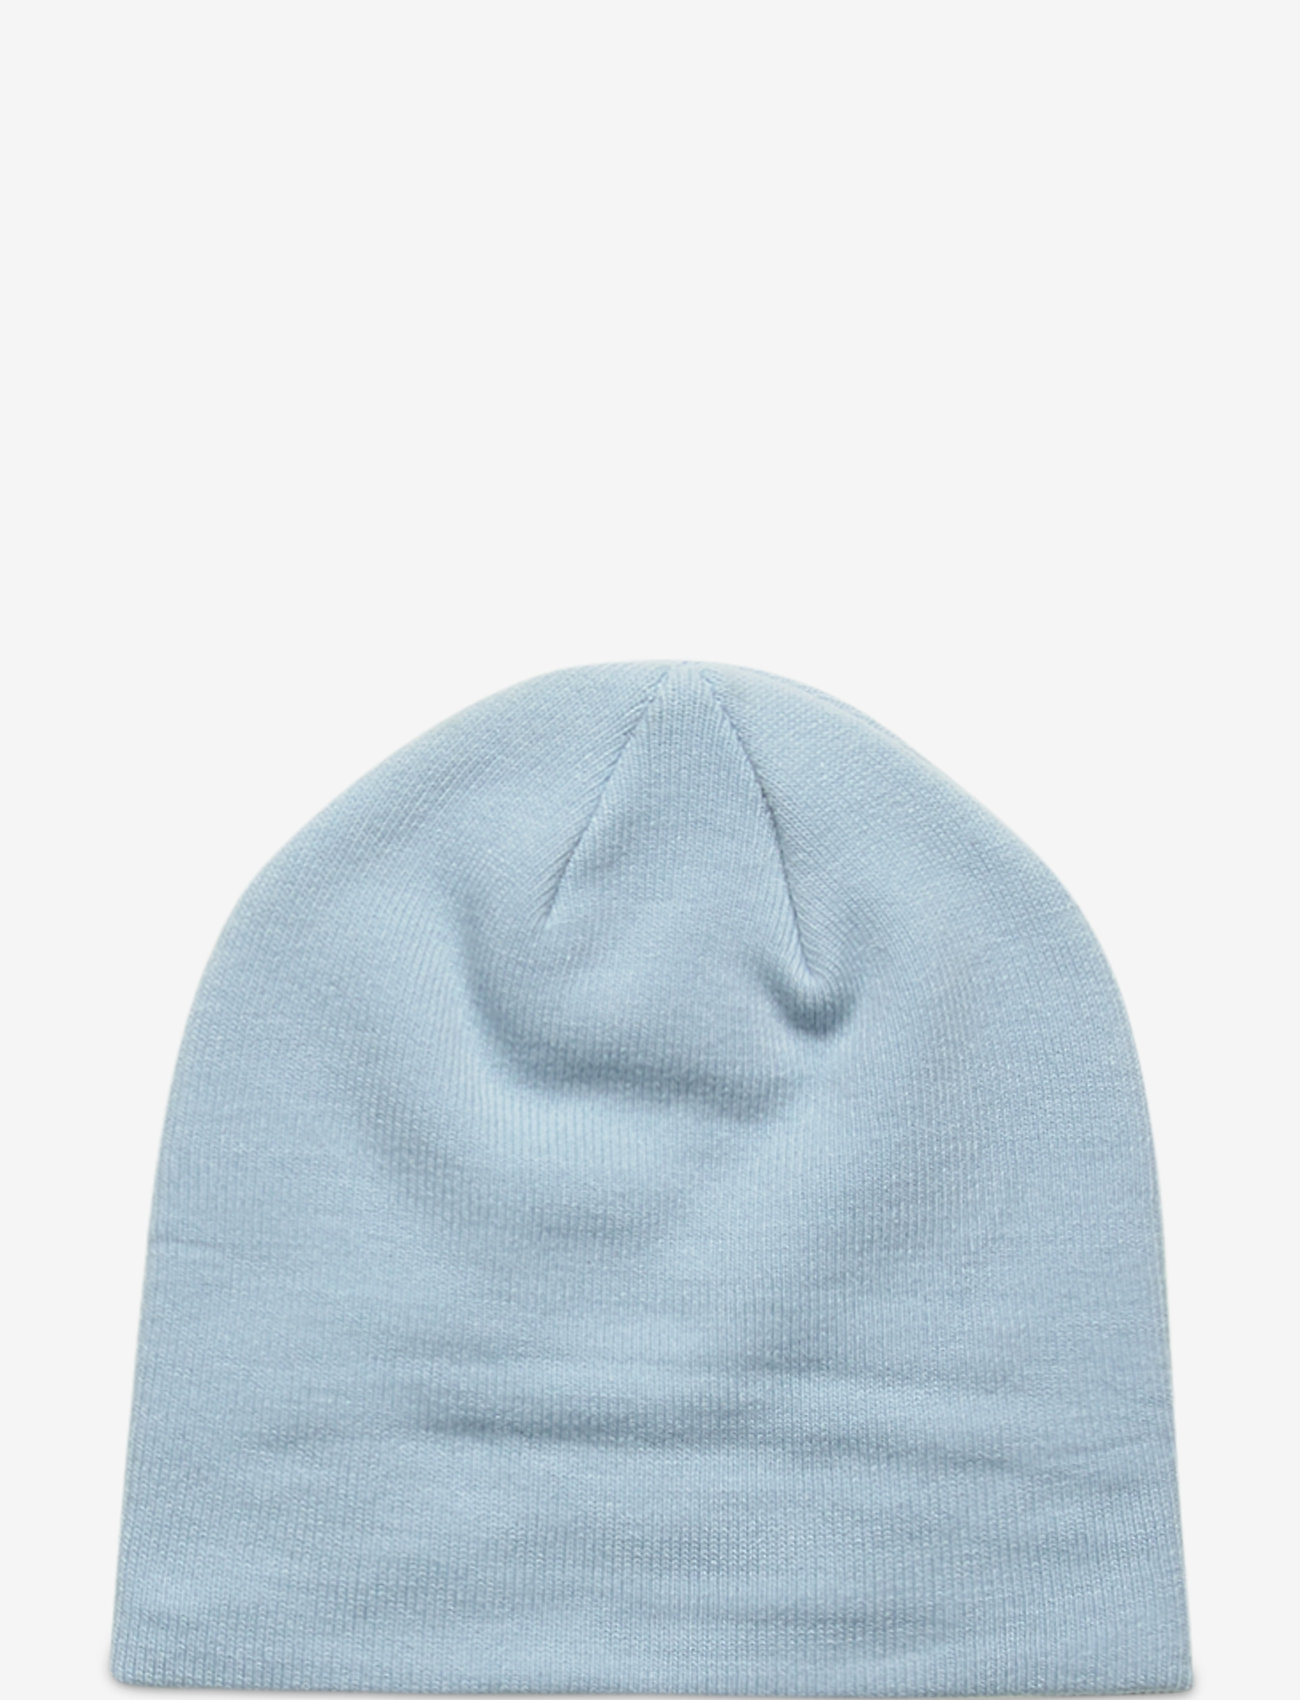 Helly-Hansen Kids Outline Knitted Hh Iconic Logo Brand Beanie